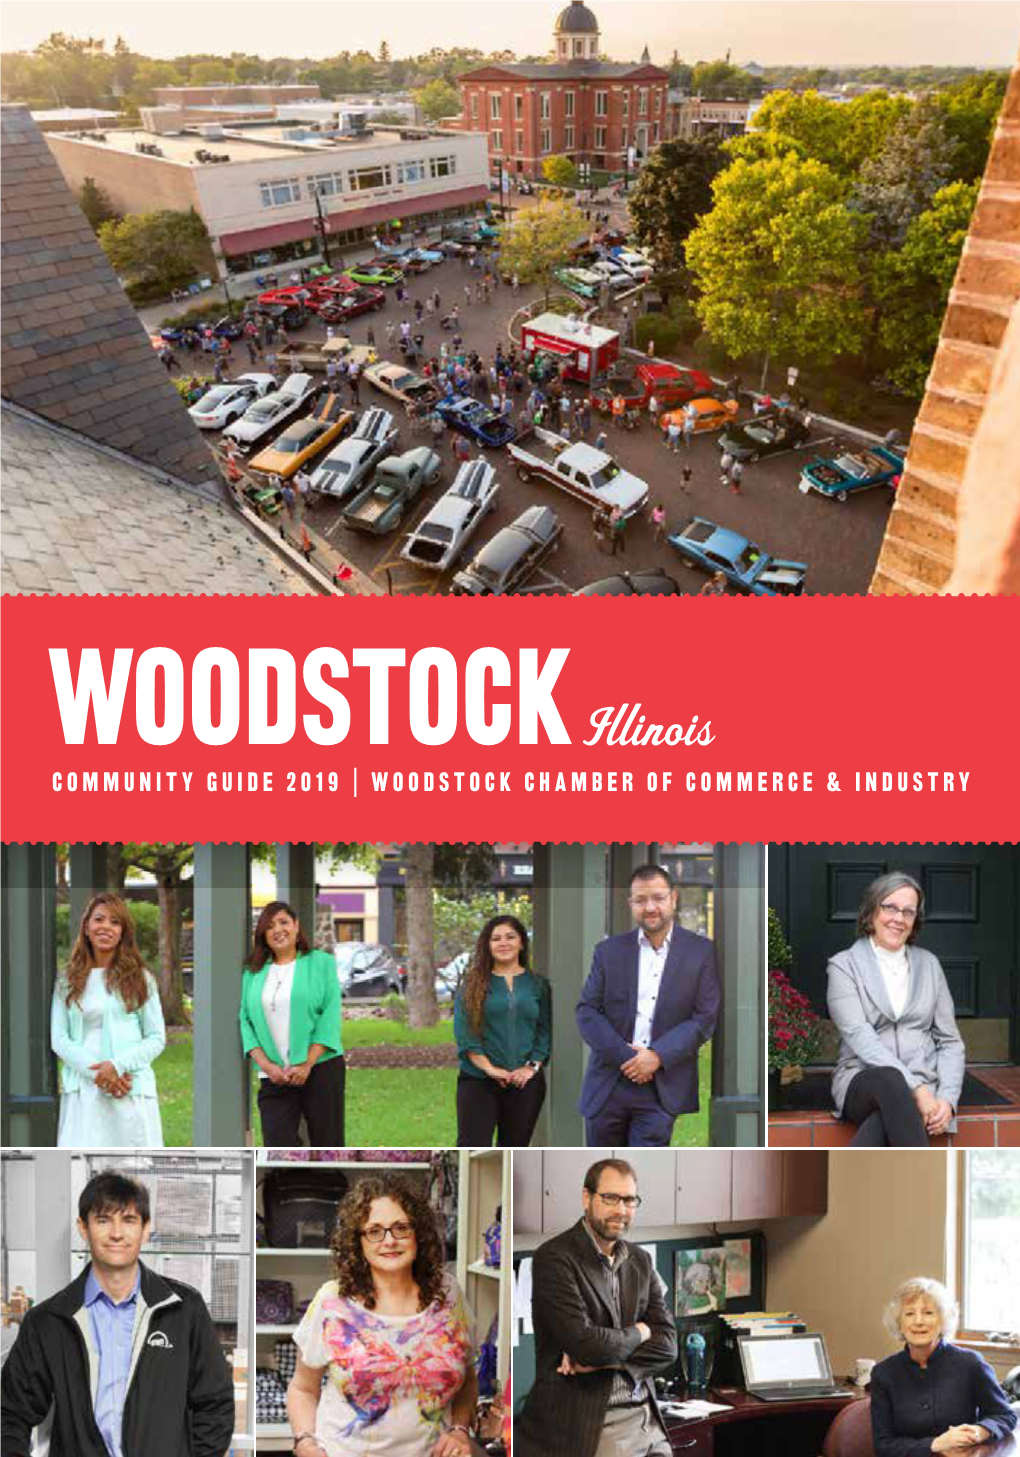 Illinois COMMUNITY GUIDE 2019 | WOODSTOCK CHAMBER of COMMERCE & INDUSTRY Mercyhealth Woodstock Apassion Formaking Lives Bettertm